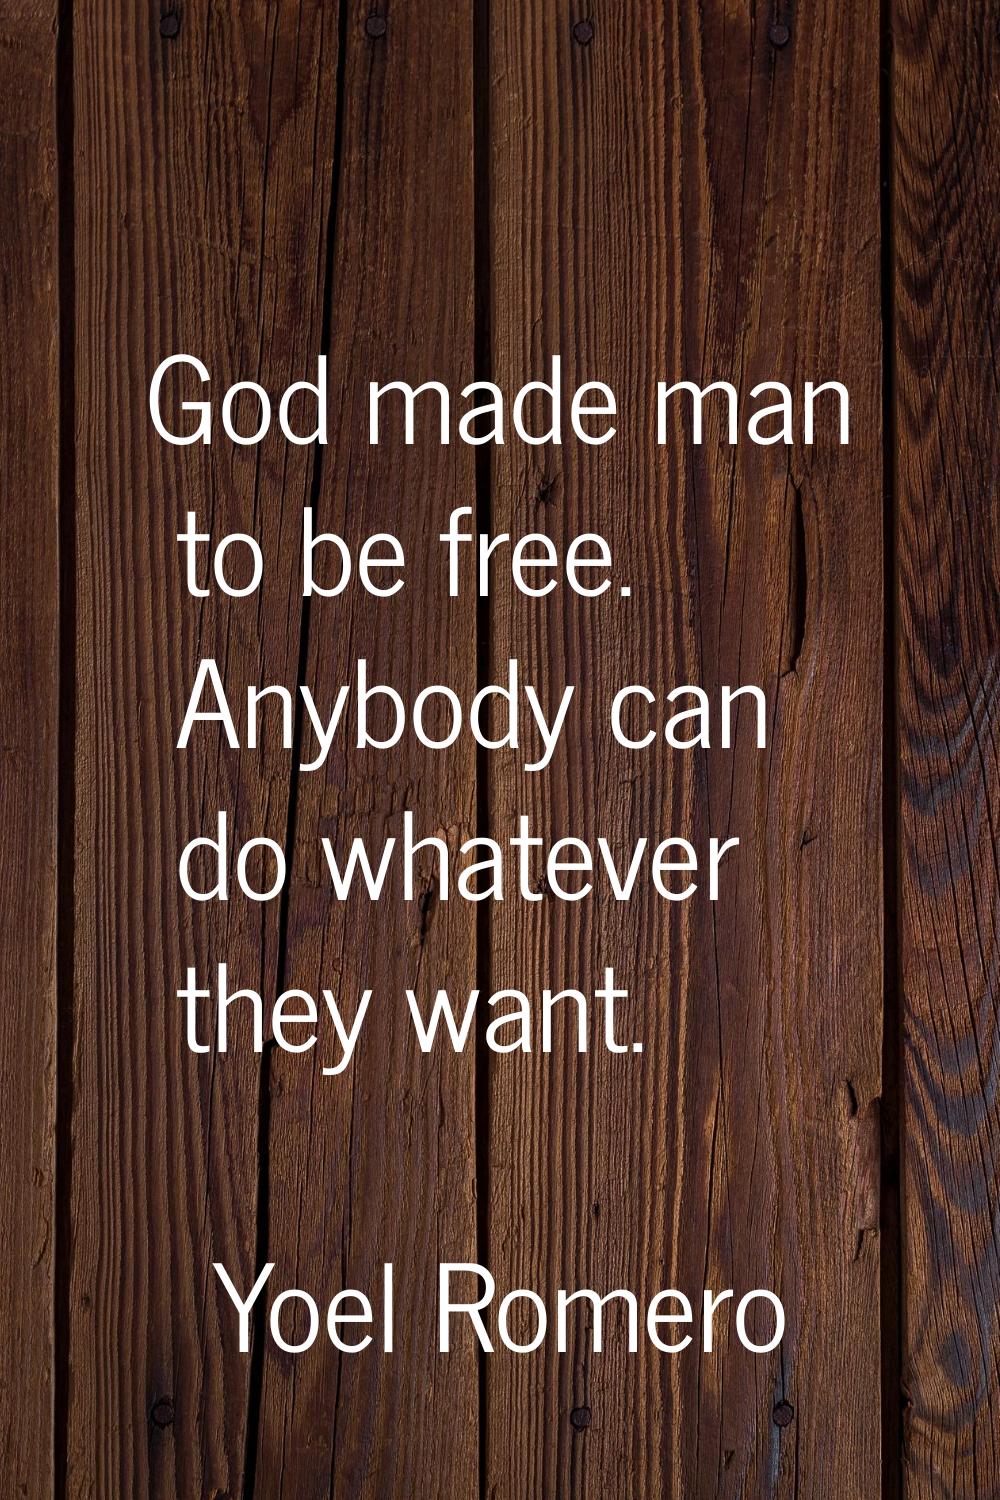 God made man to be free. Anybody can do whatever they want.